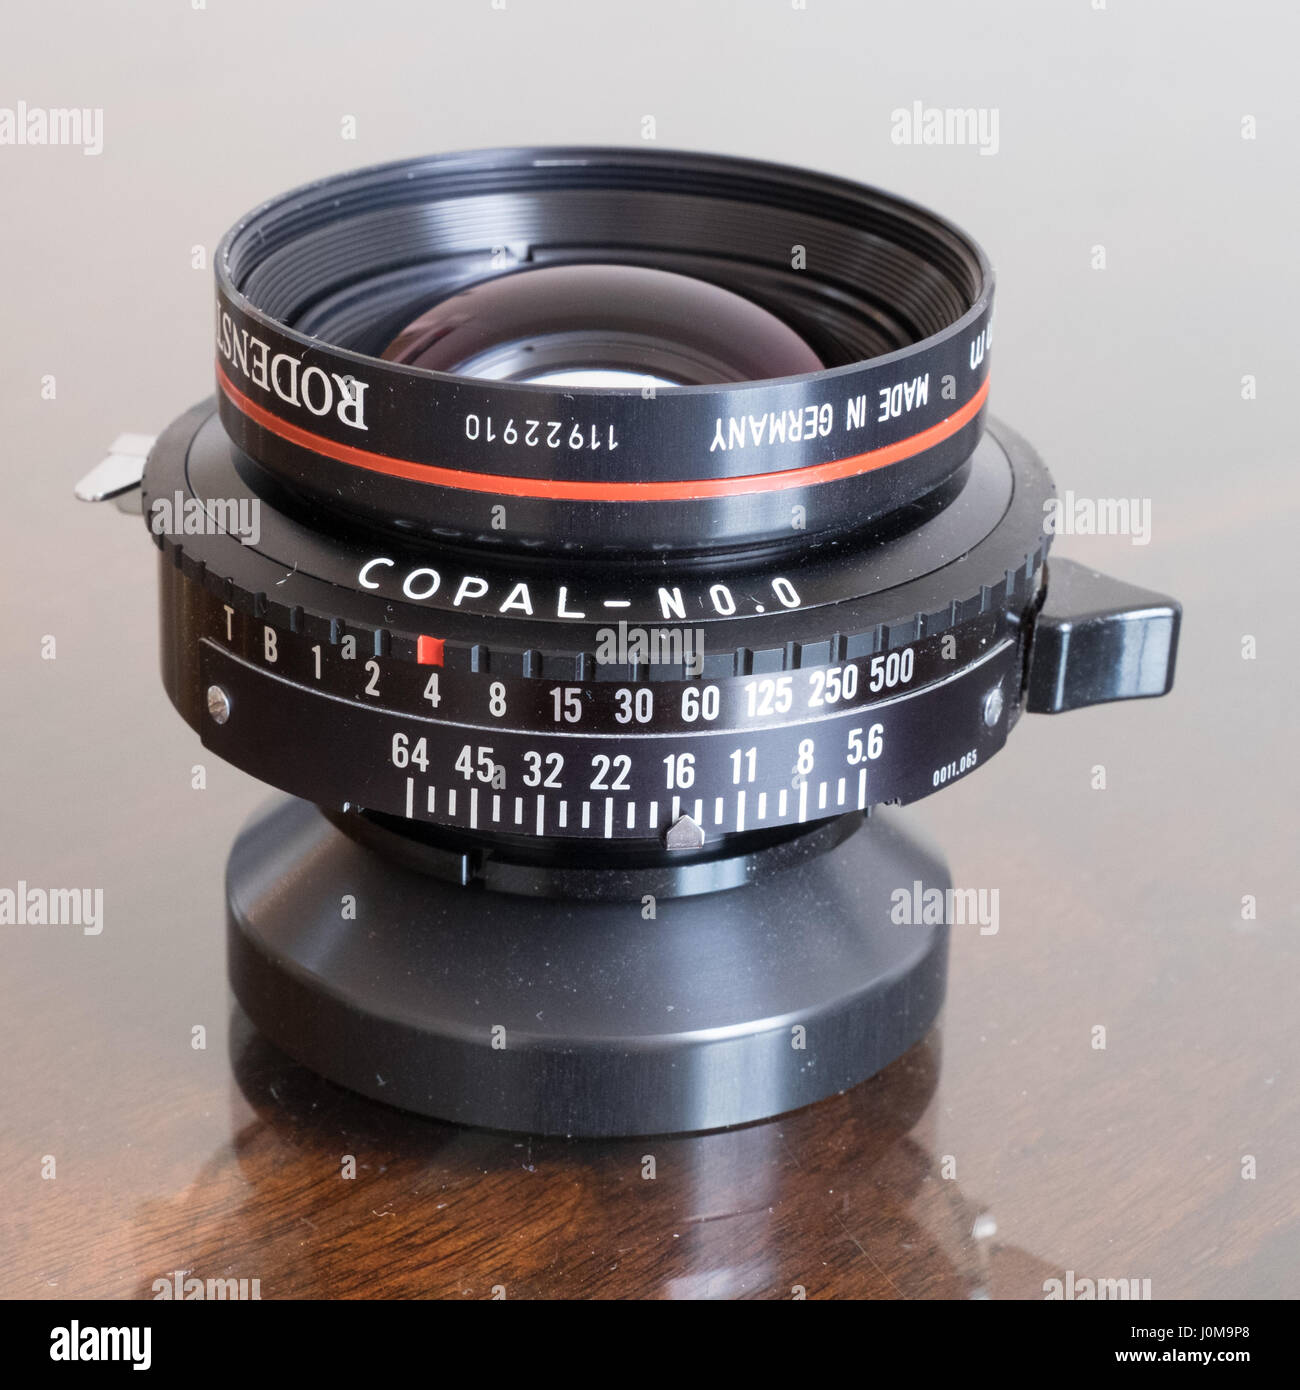 The Rodenstock 150mm f/5.6 Apo-Sironar-S Lens is a 4x5 format lens